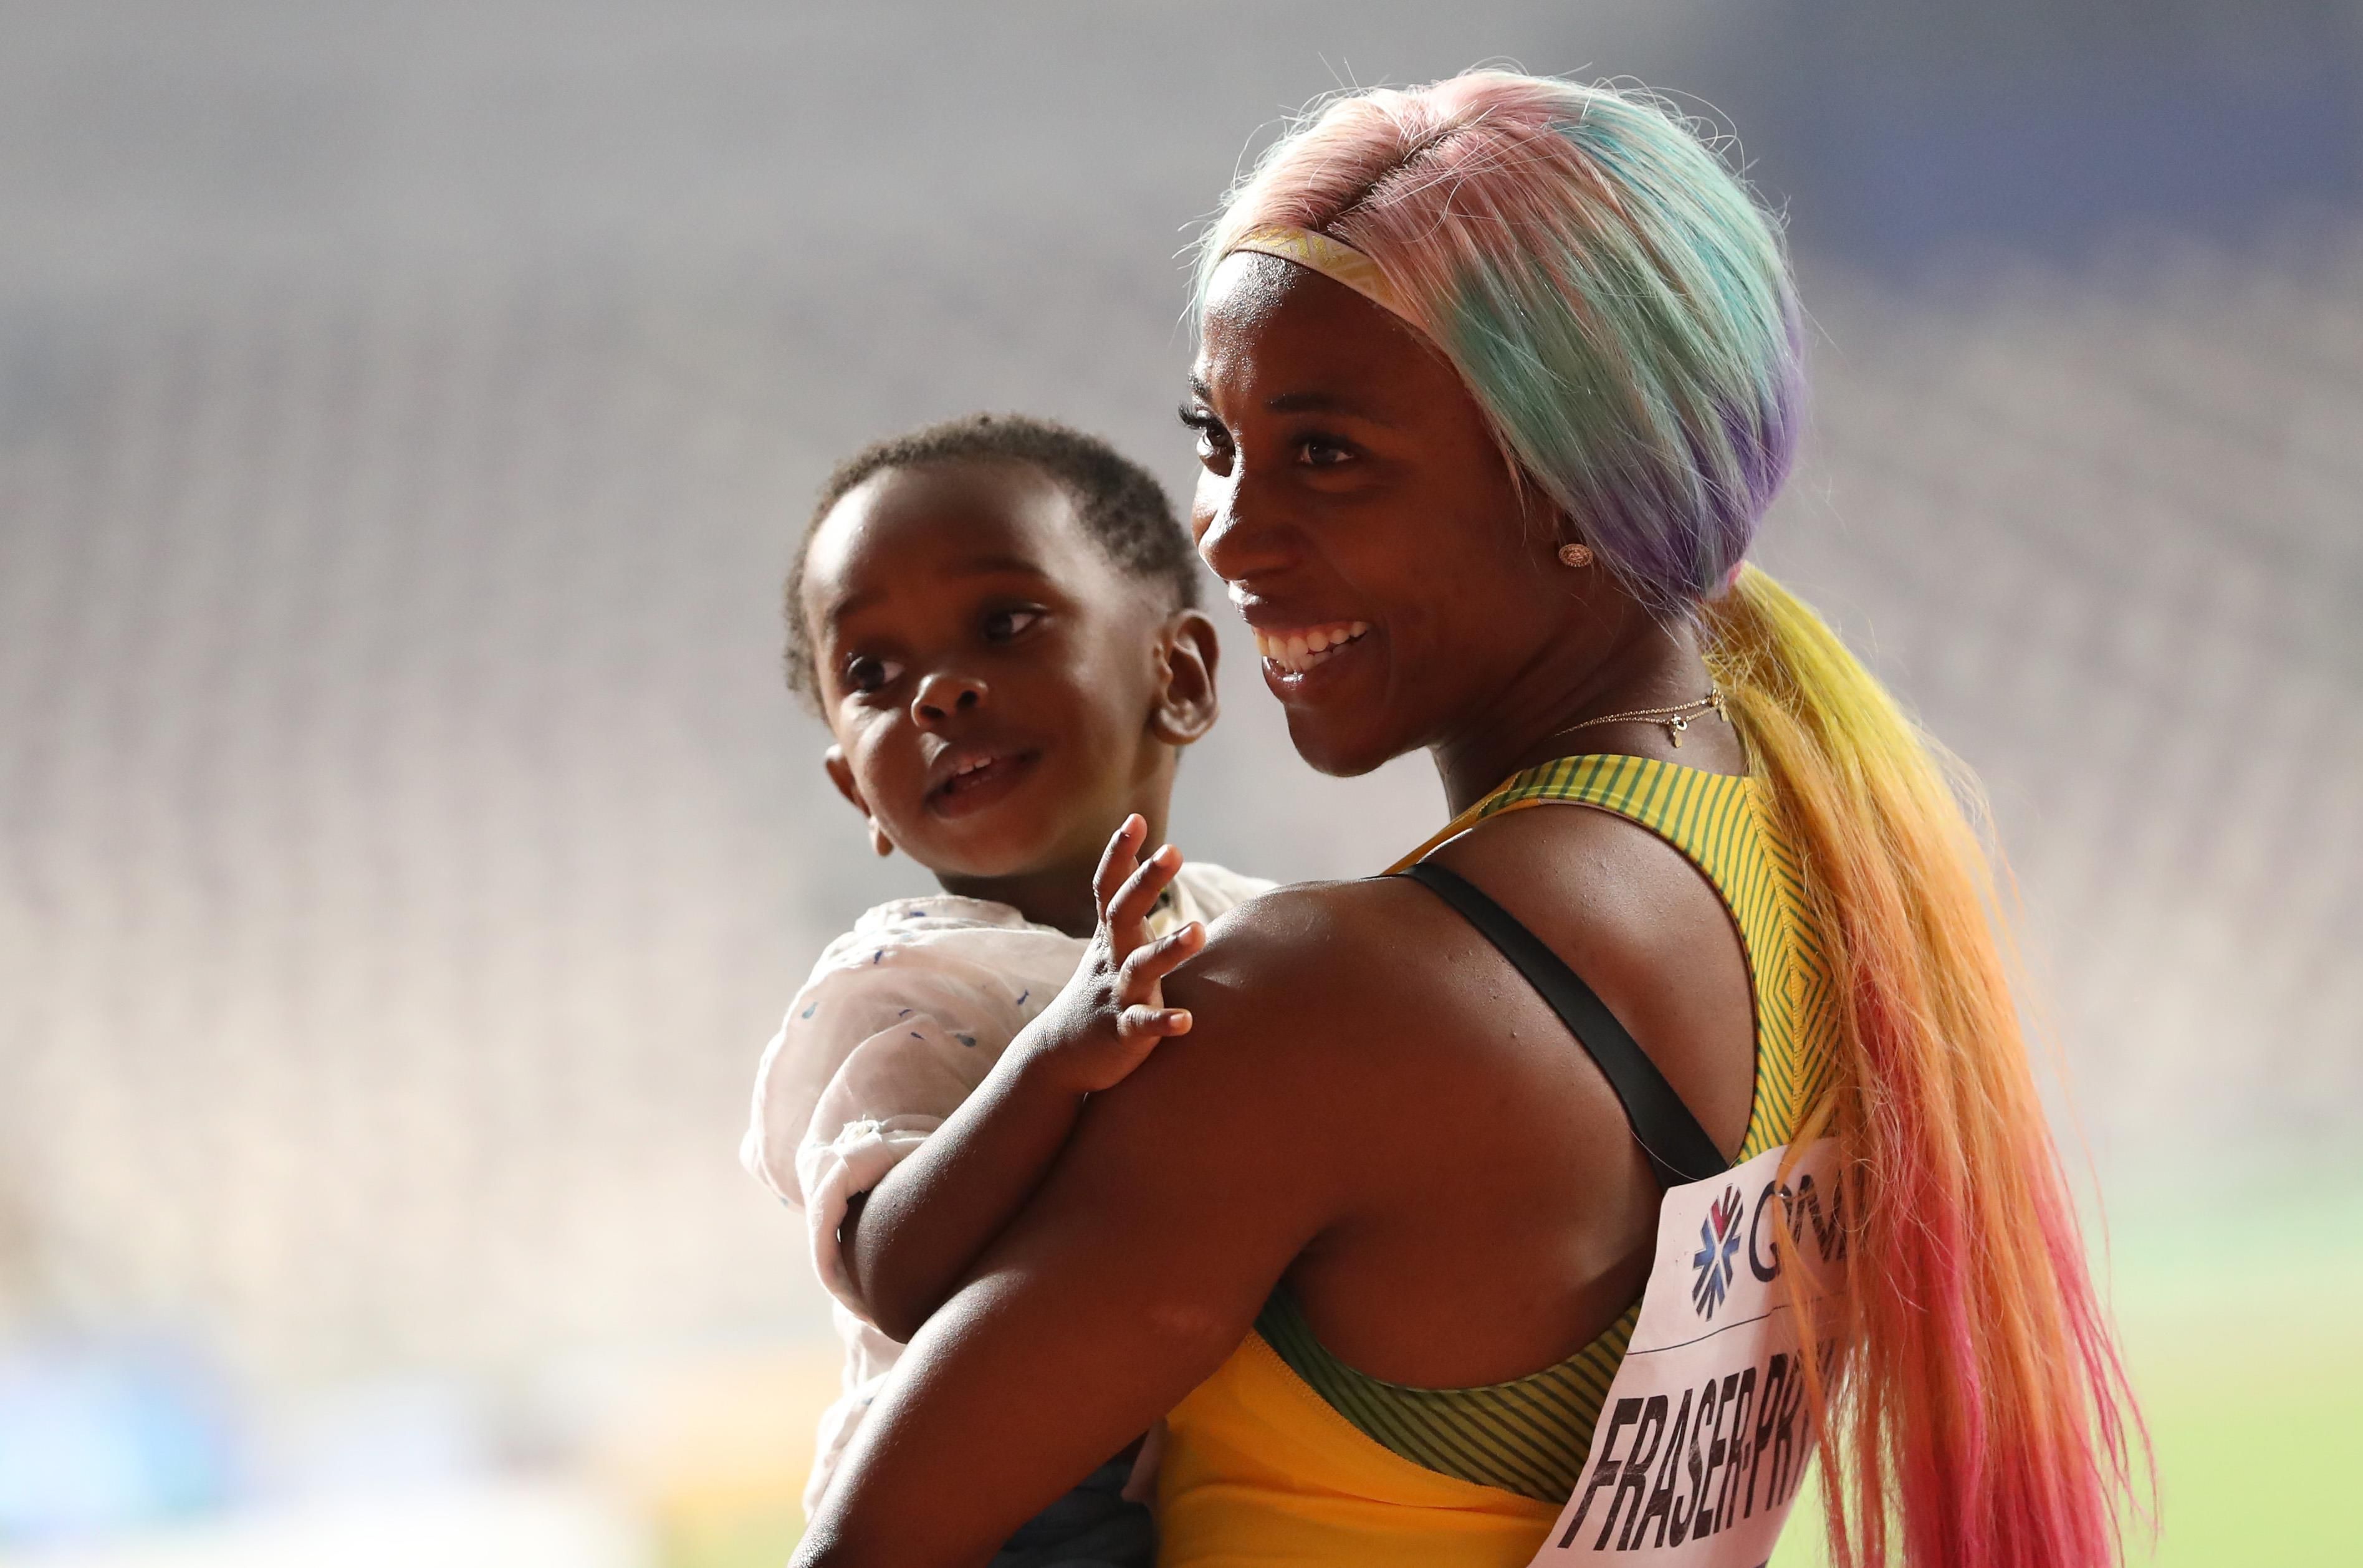 Shelly-Ann Fraser-Pryce after winning the 100m at the IAAF World Athletics Championships Doha 2019